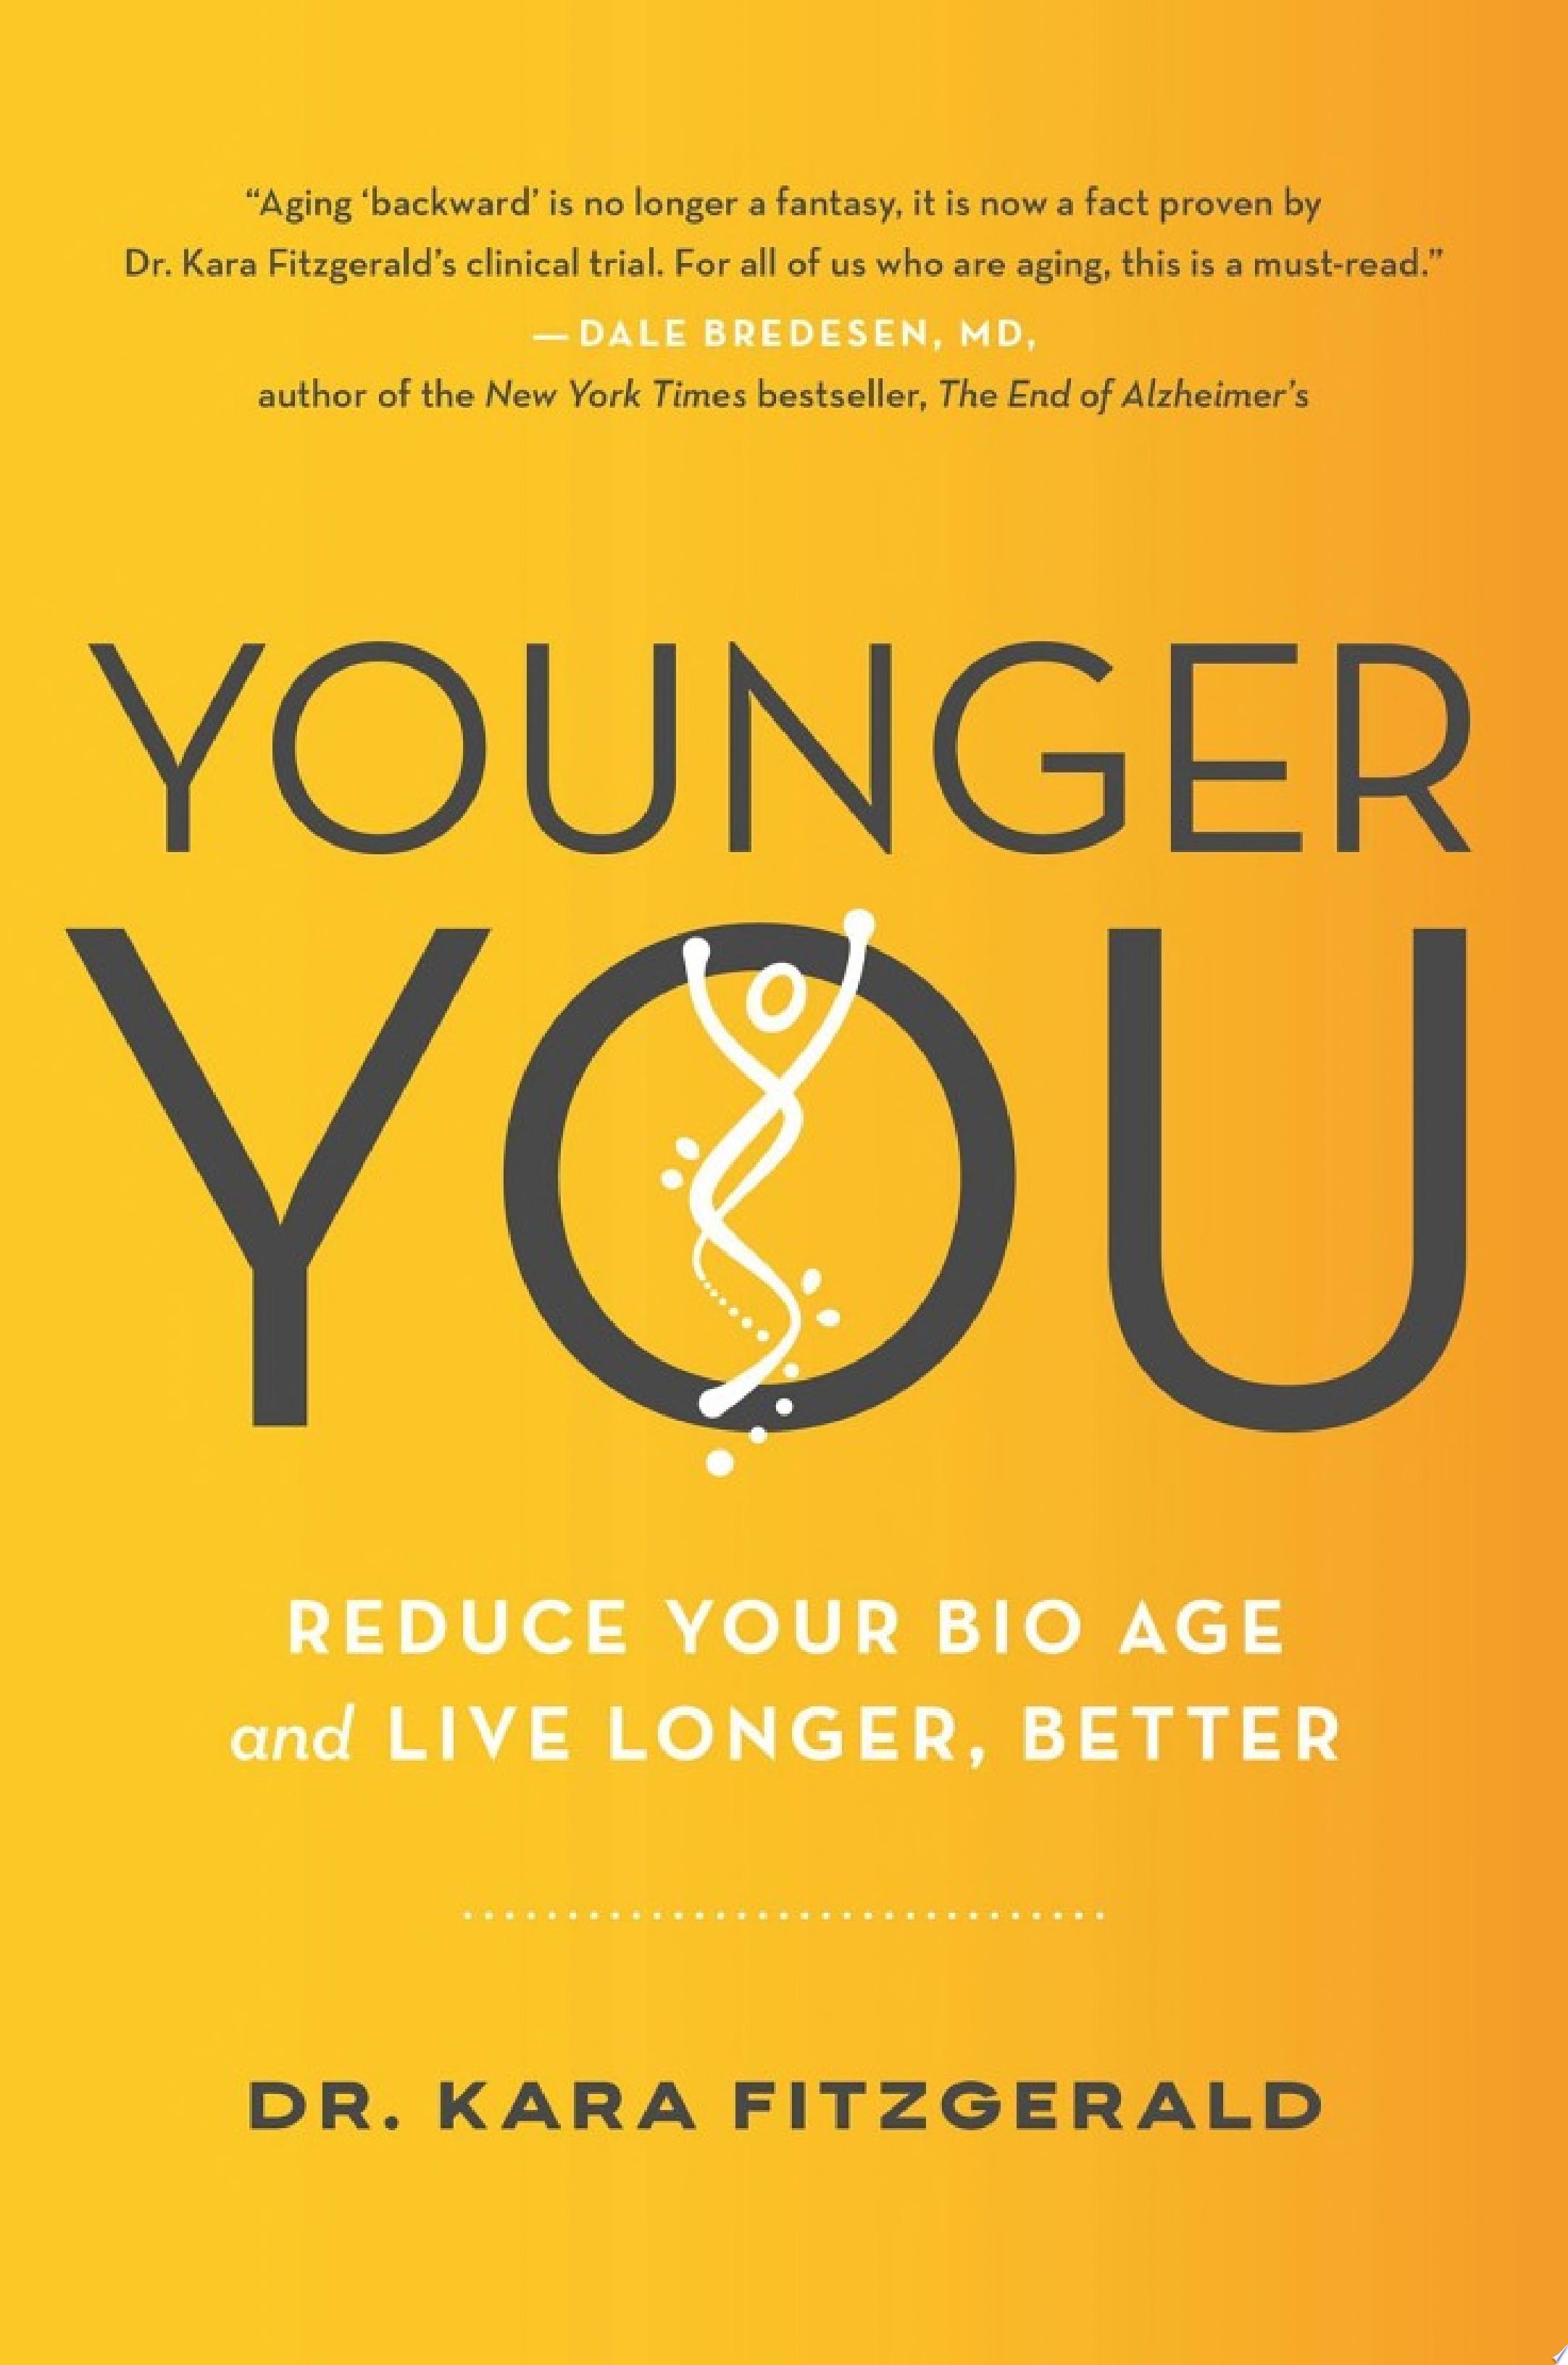 Image for "Younger You"